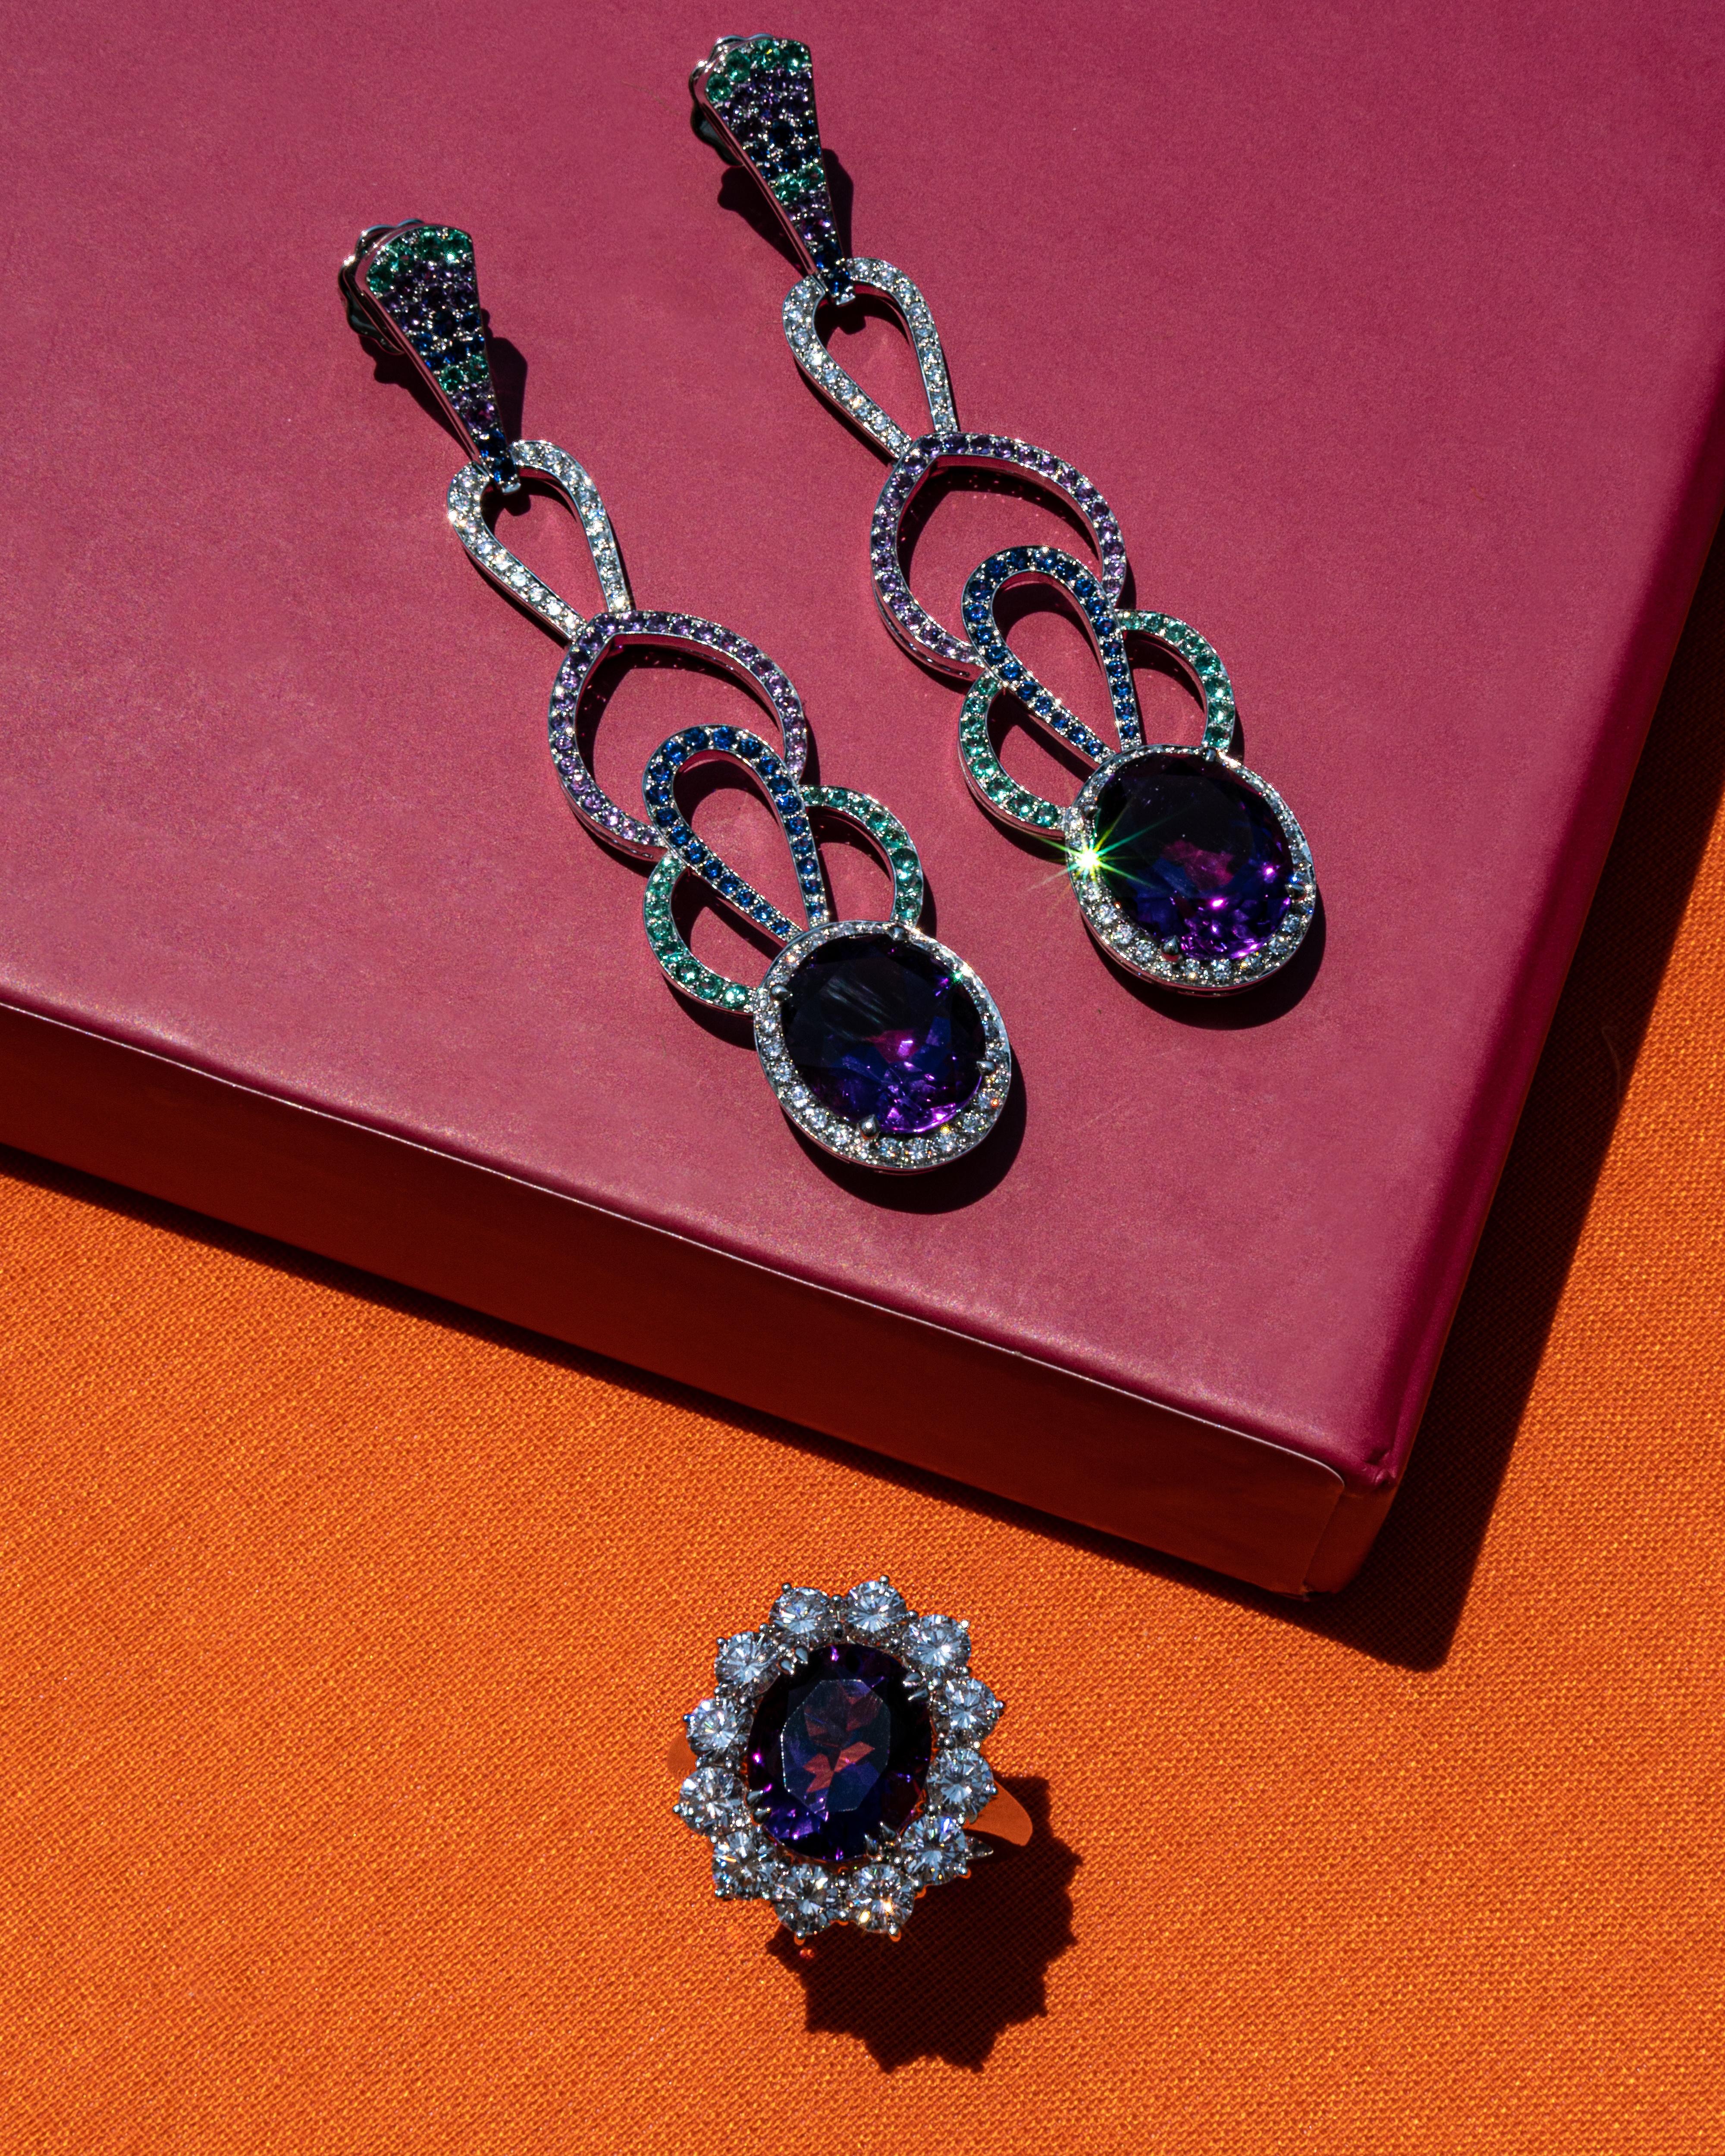 Round Cut 12.62 Carat Amethyst, Emerald, Colored Sapphire and Diamond Earrings in 18k Gold